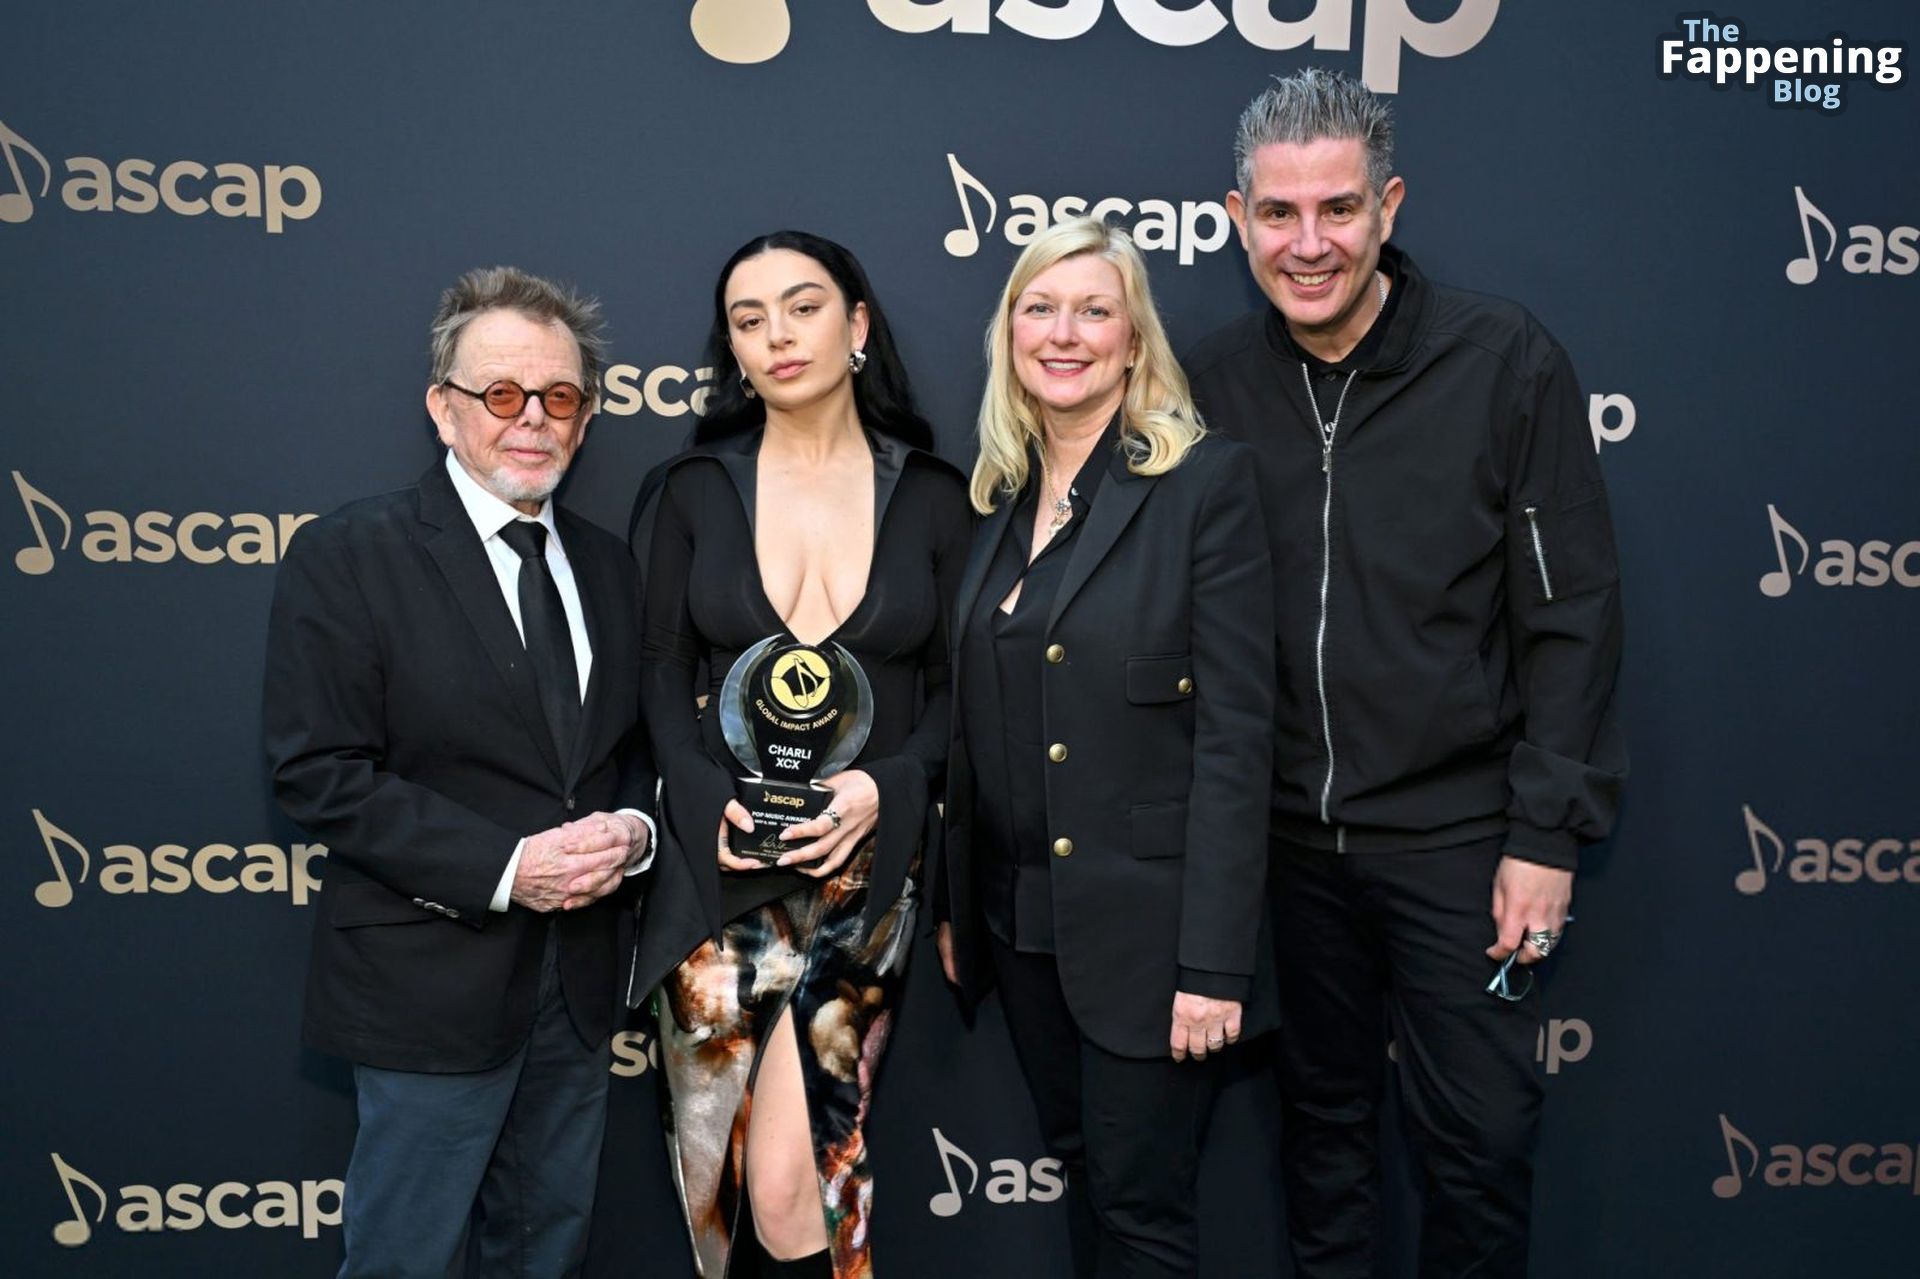 charli-xcx-braless-cleavage-ascap-pop-music-awards-12-thefappeningblog.com_.jpg